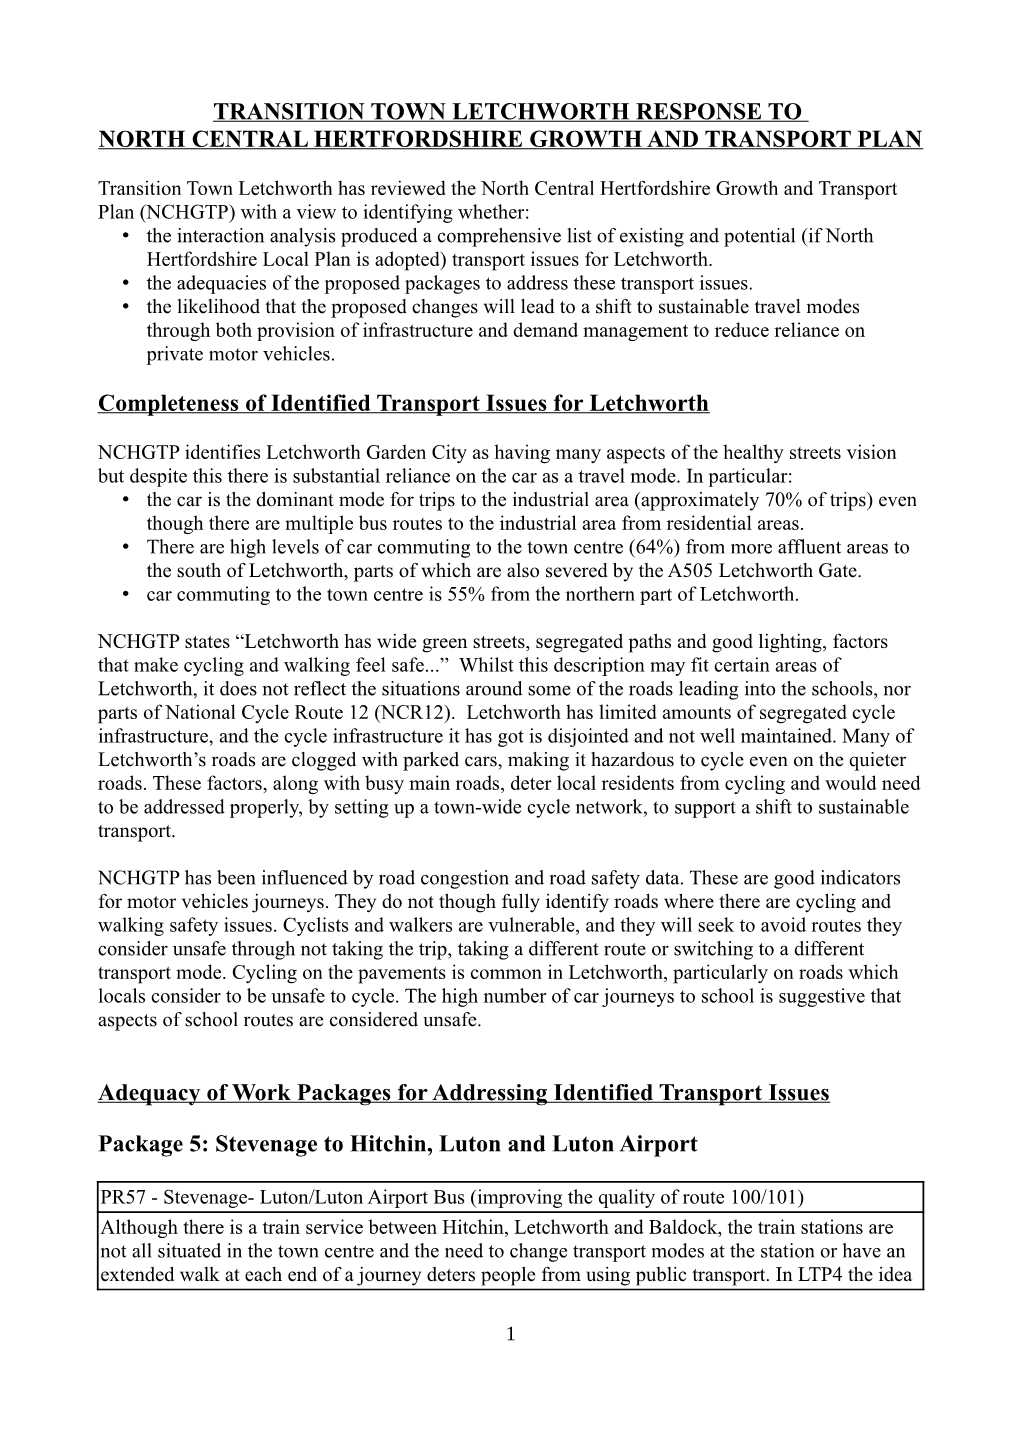 Transition Town Letchworth Response to North Central Hertfordshire Growth and Transport Plan